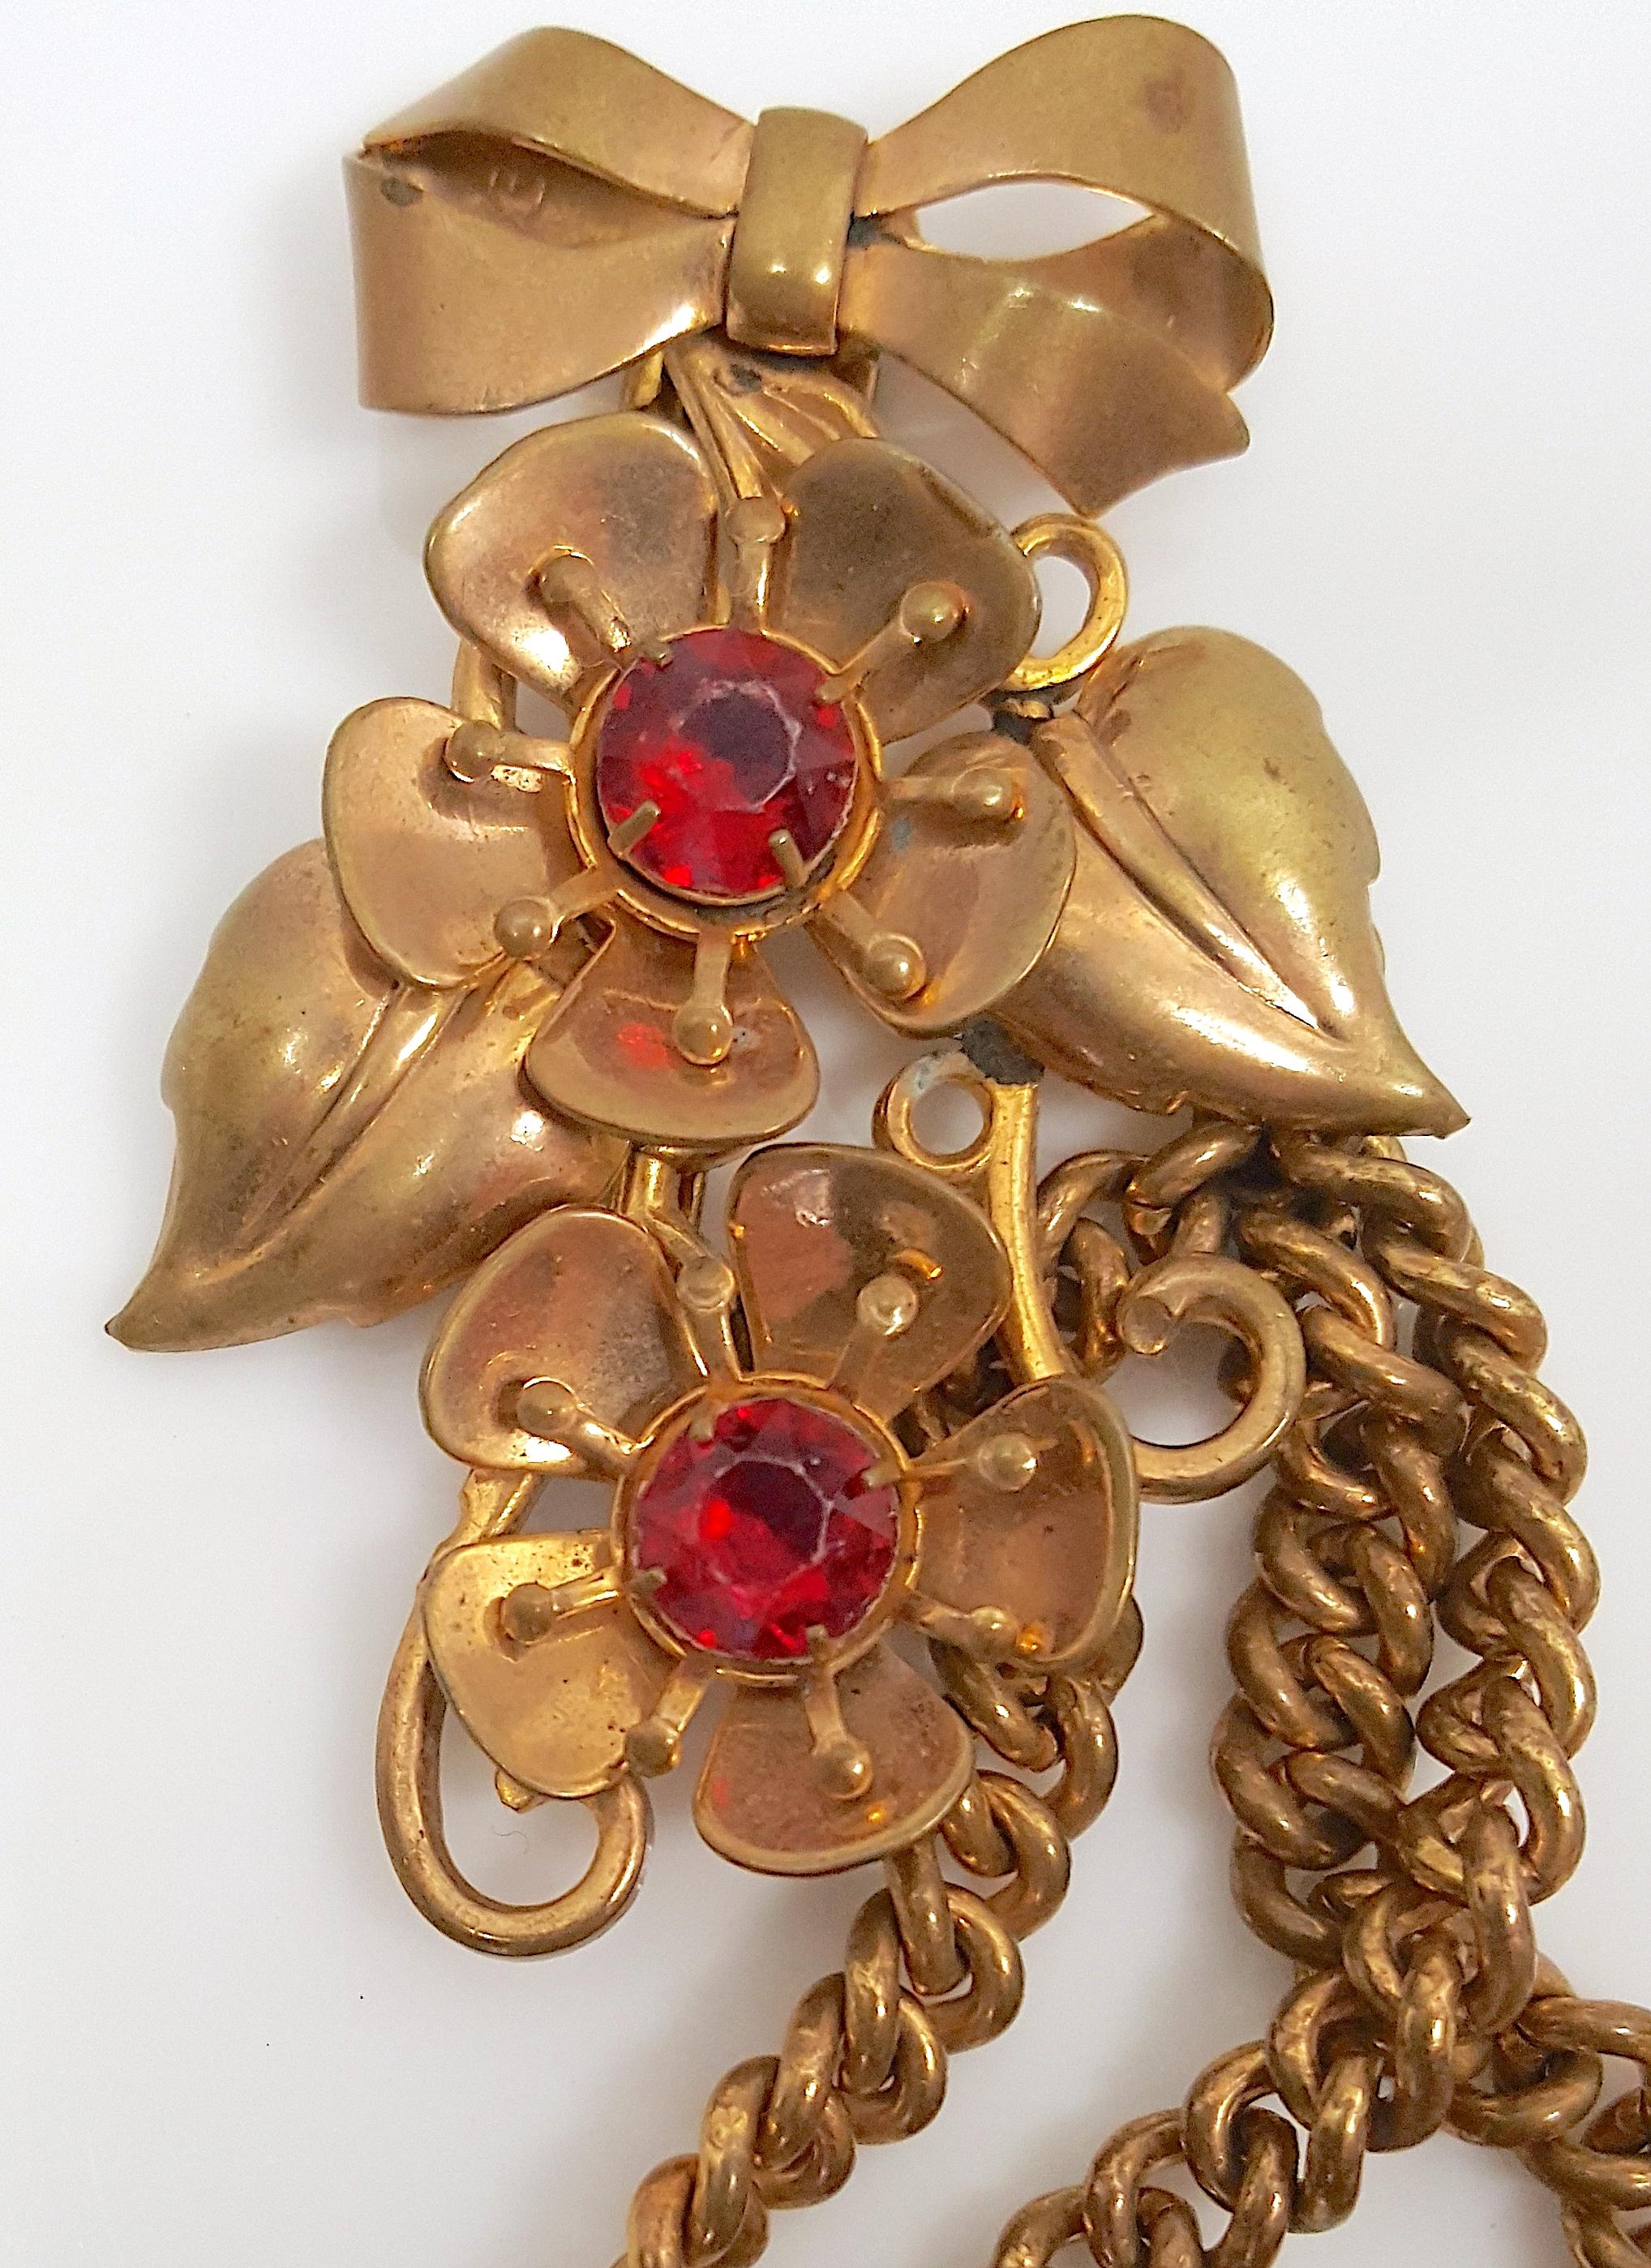 As one of Miriam Haskell's earliest fur clips from the late 1920s, these two Russian-gold gilt mostly brass brooches by her first designer Frank Hess are tethered as a lariat by three long chains, which is similar to a relatively simple all-metal